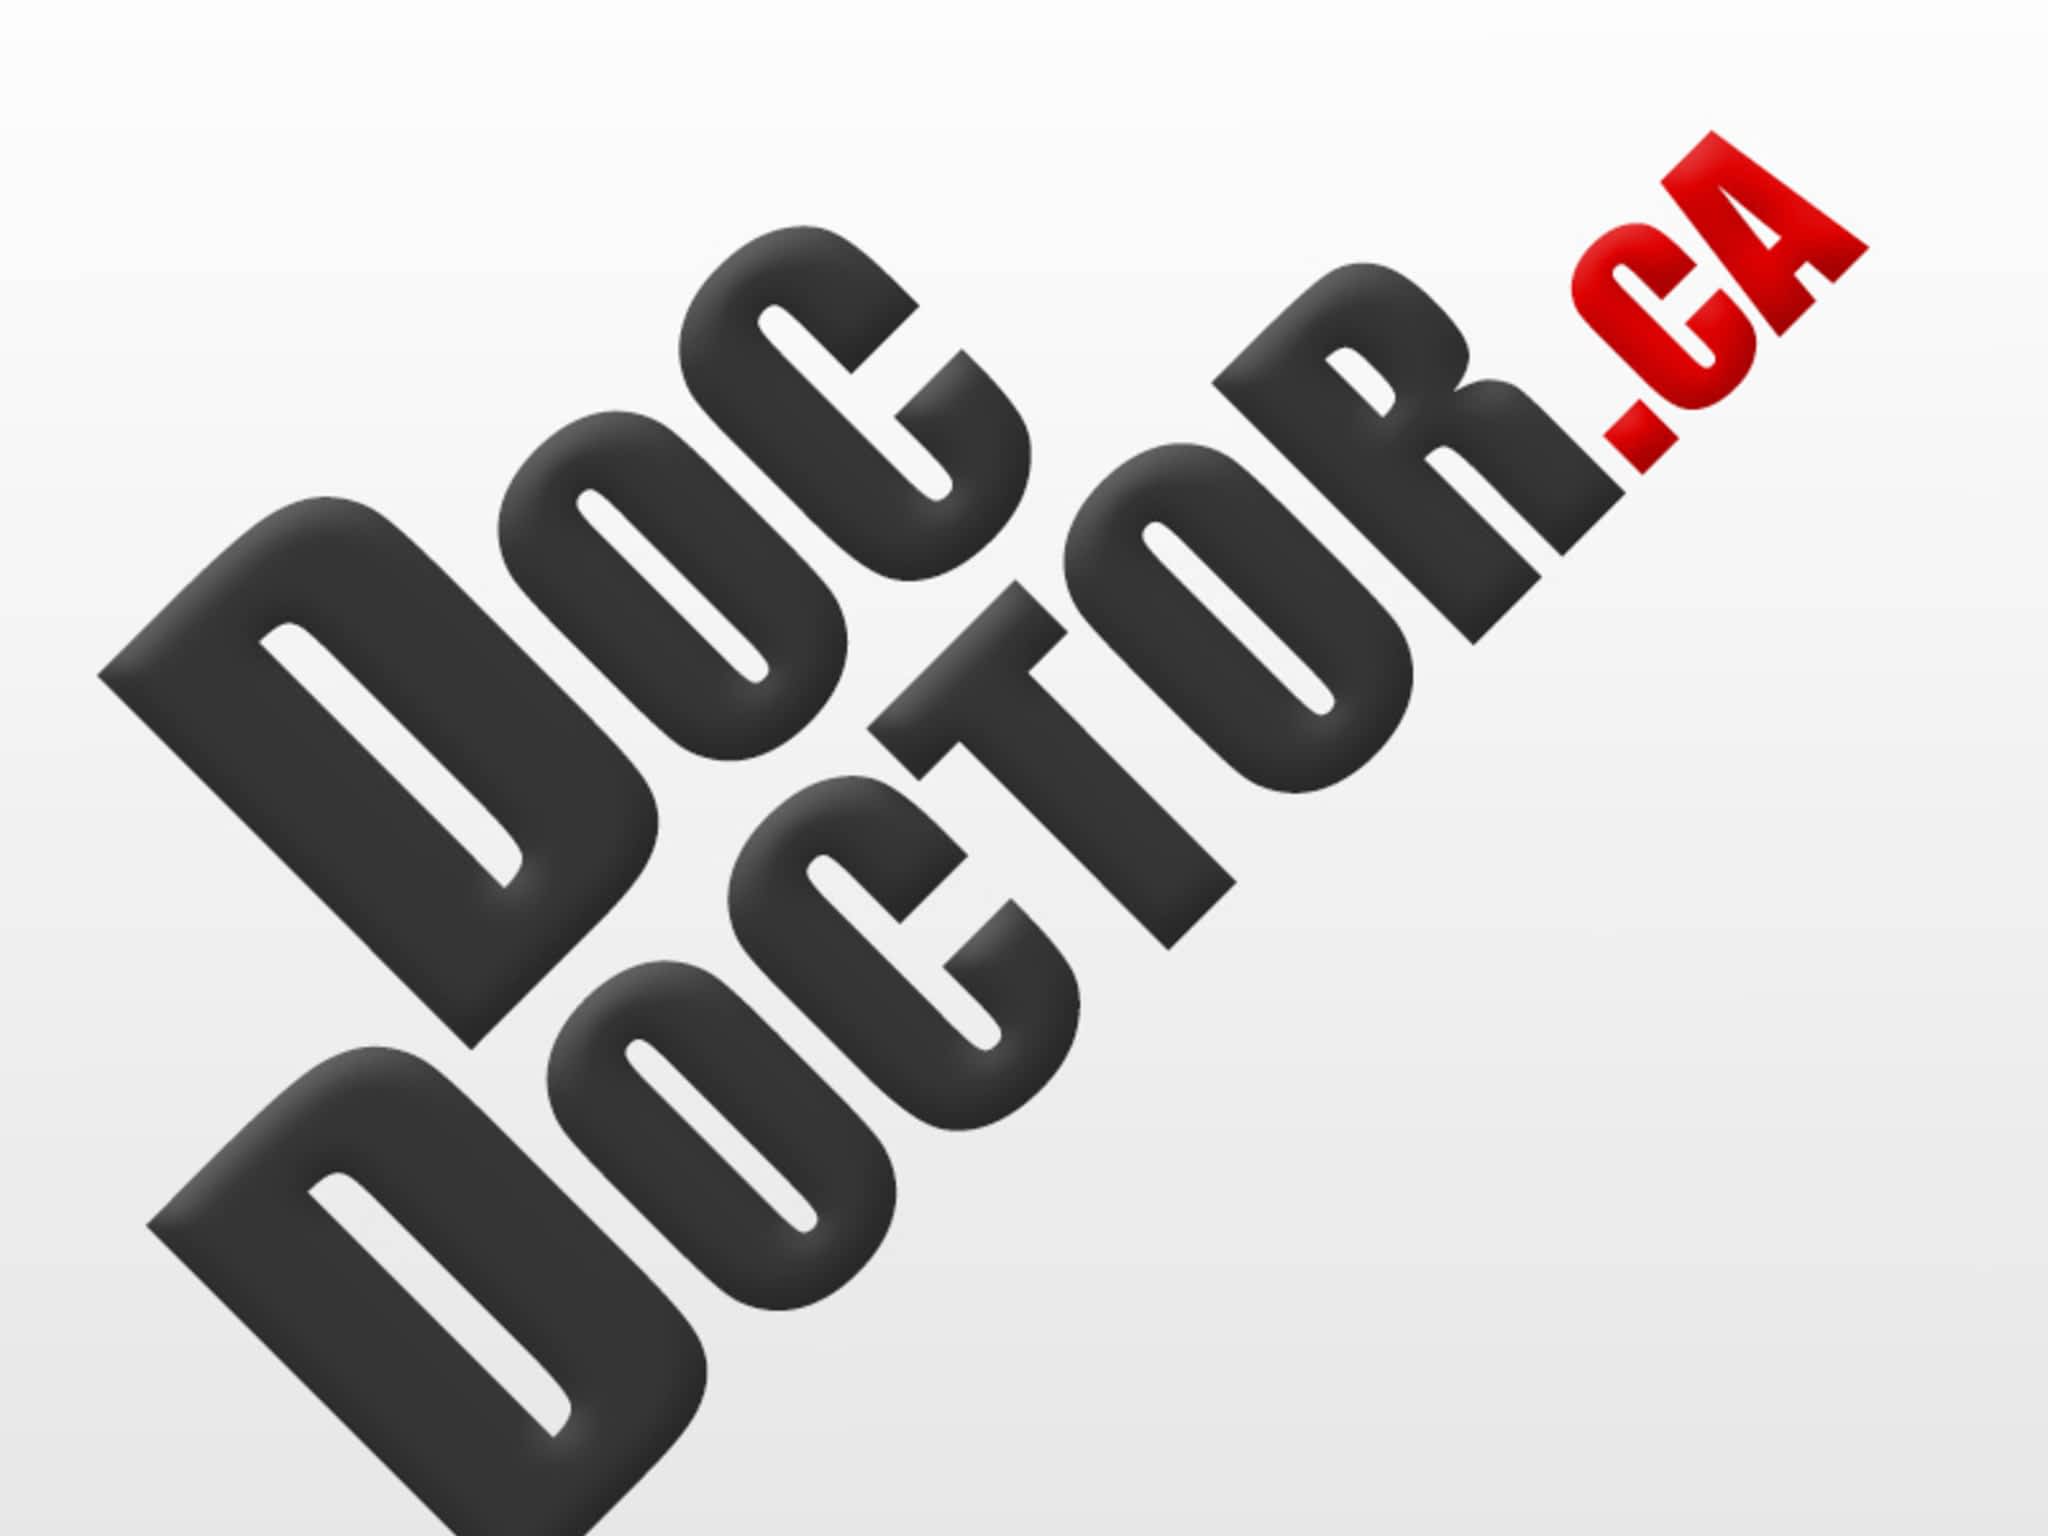 photo DocDoctor | Resume Writing & Cover Letter Services | Ottawa Toronto Canada DocDoctor.ca